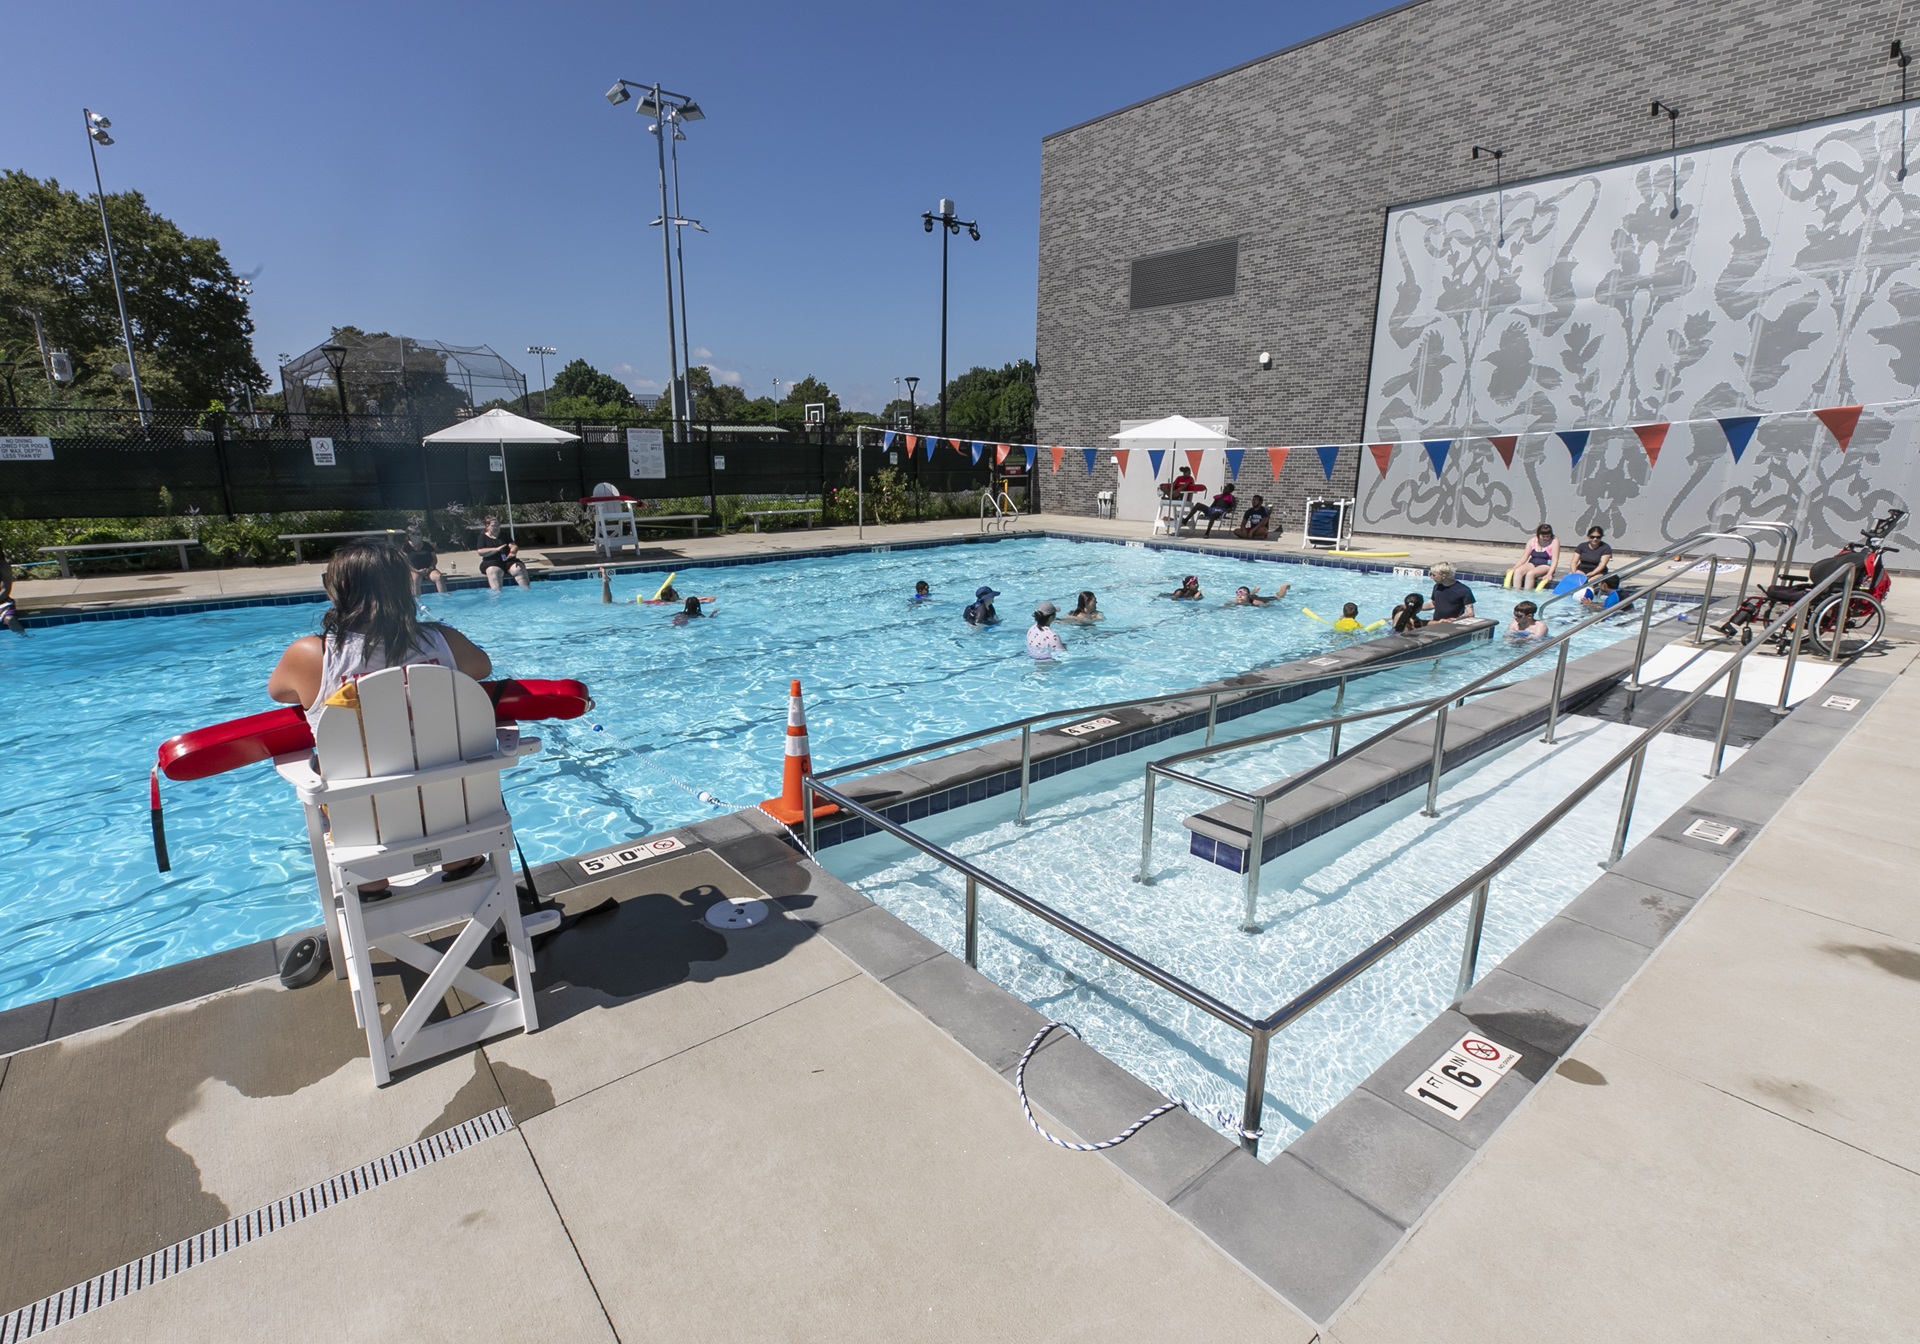 Gold Star Pool's lap pool is ADA compliant. Patrons swim in the shallow end and a wheelchair is parked at the top of the wheelchair ramp. A lifeguard oversees the swimmers.